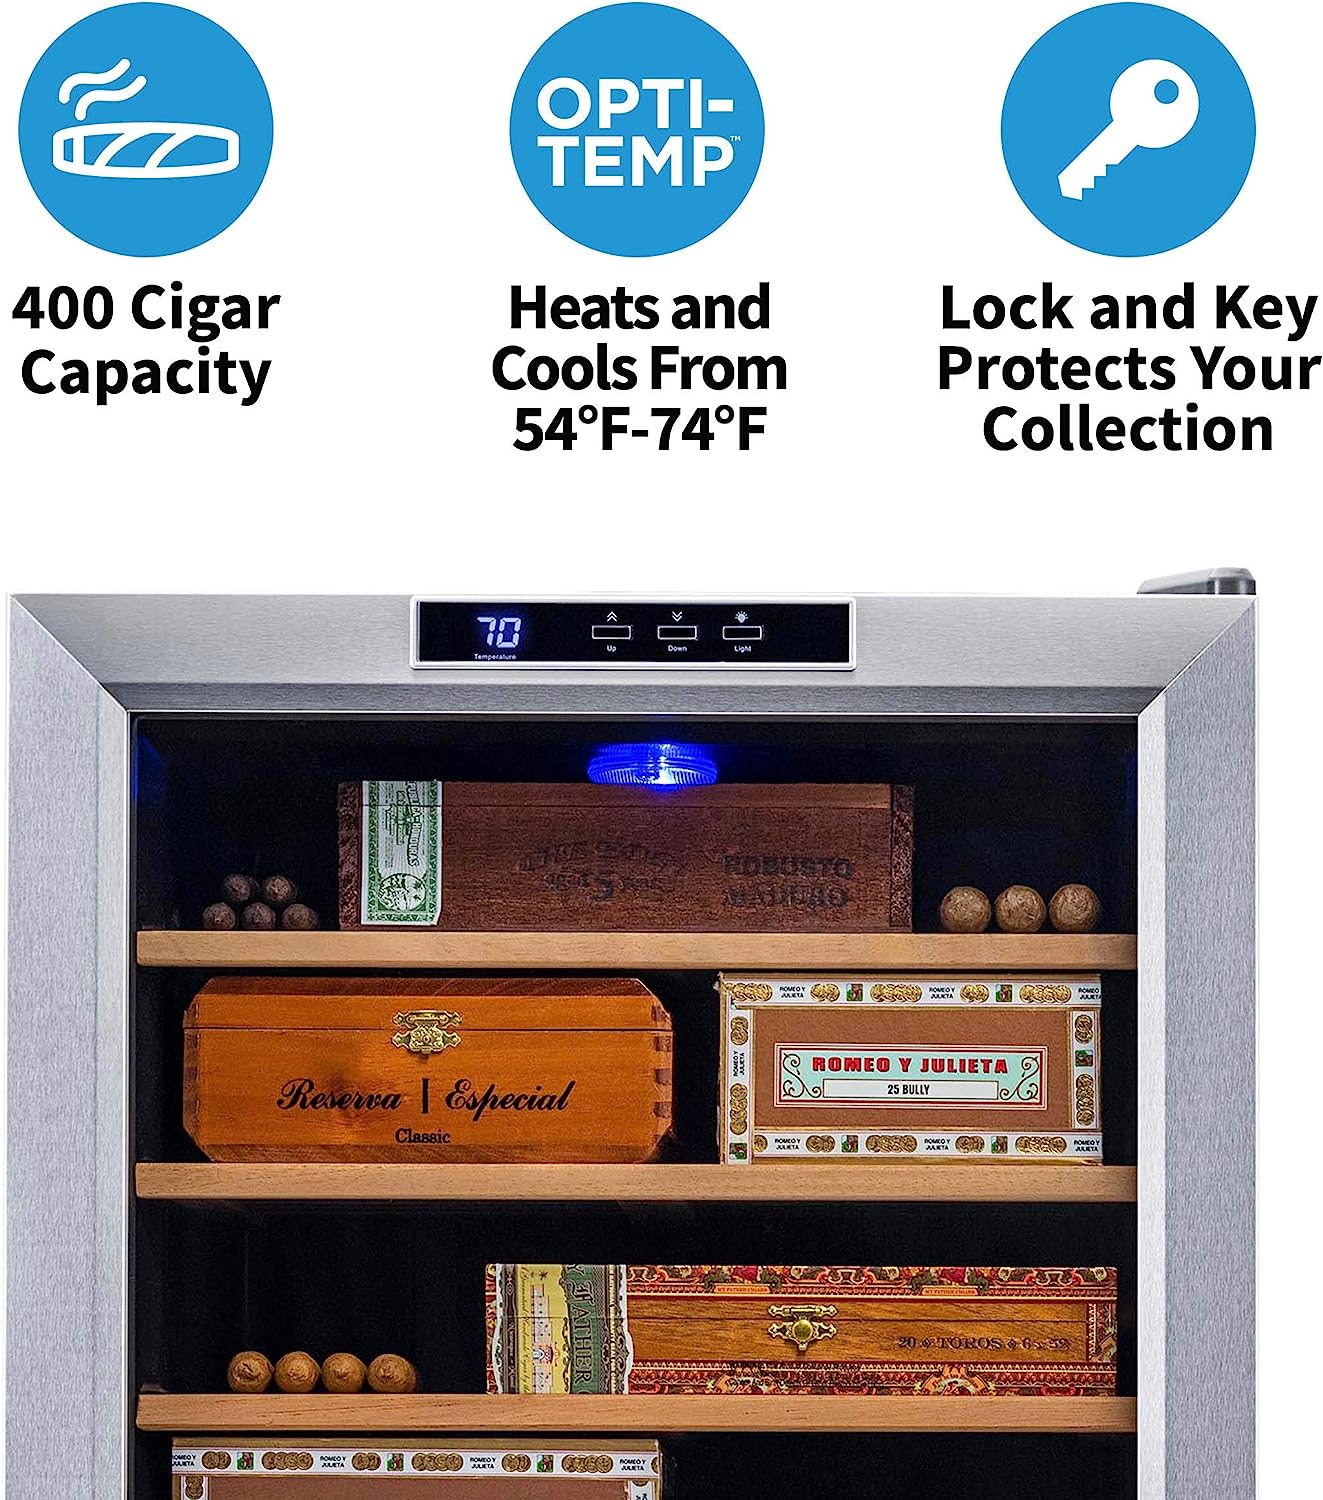 climate-controlled-cigar-humidor-cc-300h-stainless steel-5